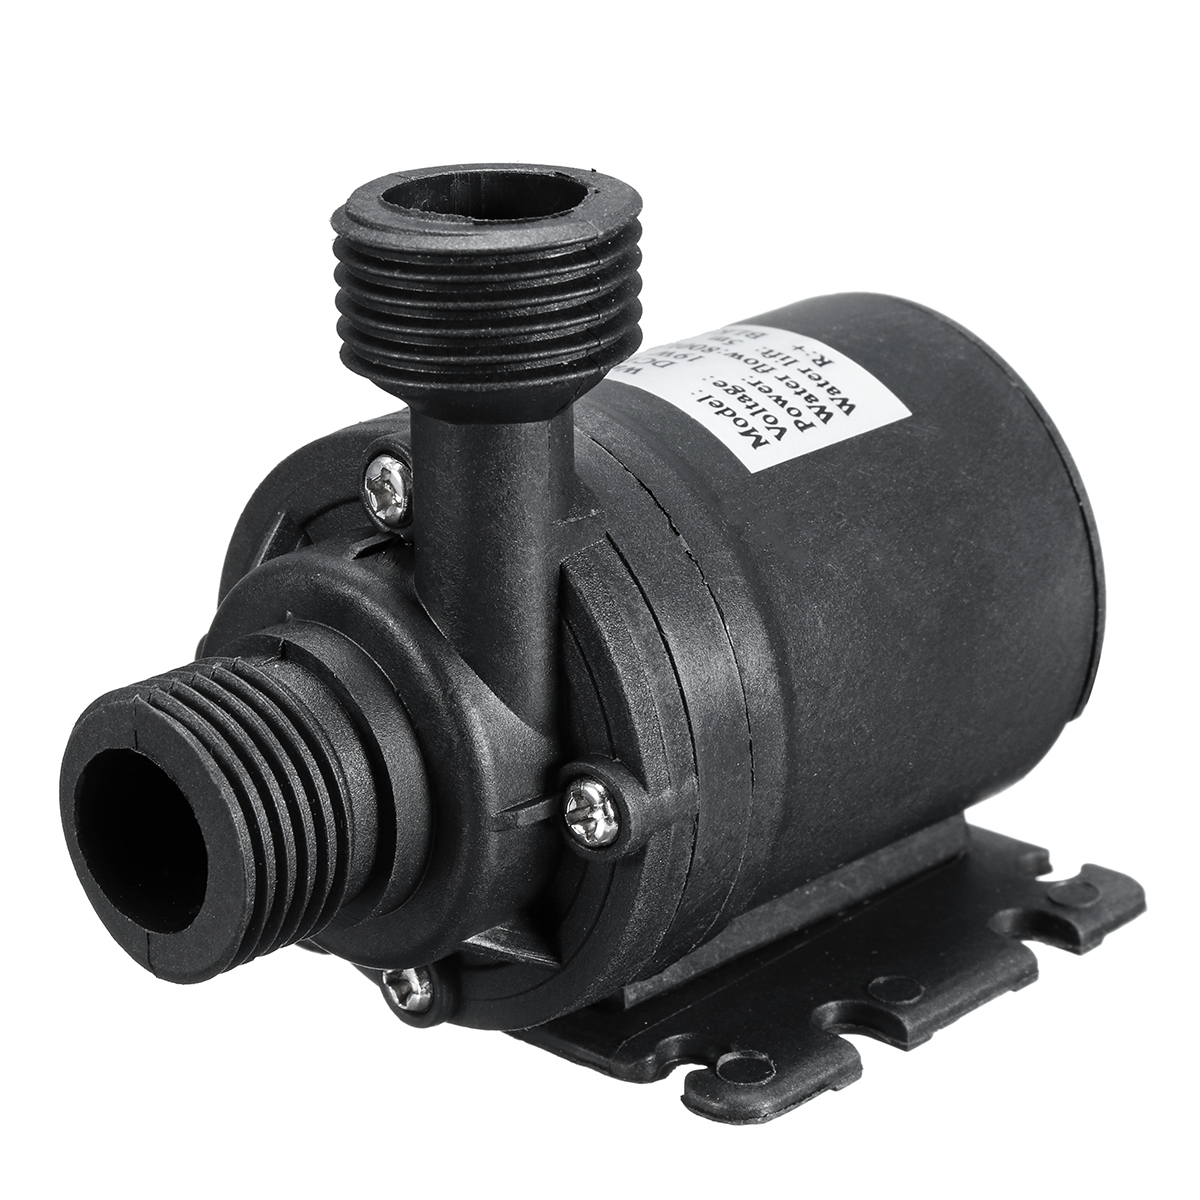 ZYW680-Mini-DC-24V-Water-Pump-Ultra-Quiet-55m-Lift-Brushless-Motor-Submersible-Water-Pump-1531436-5